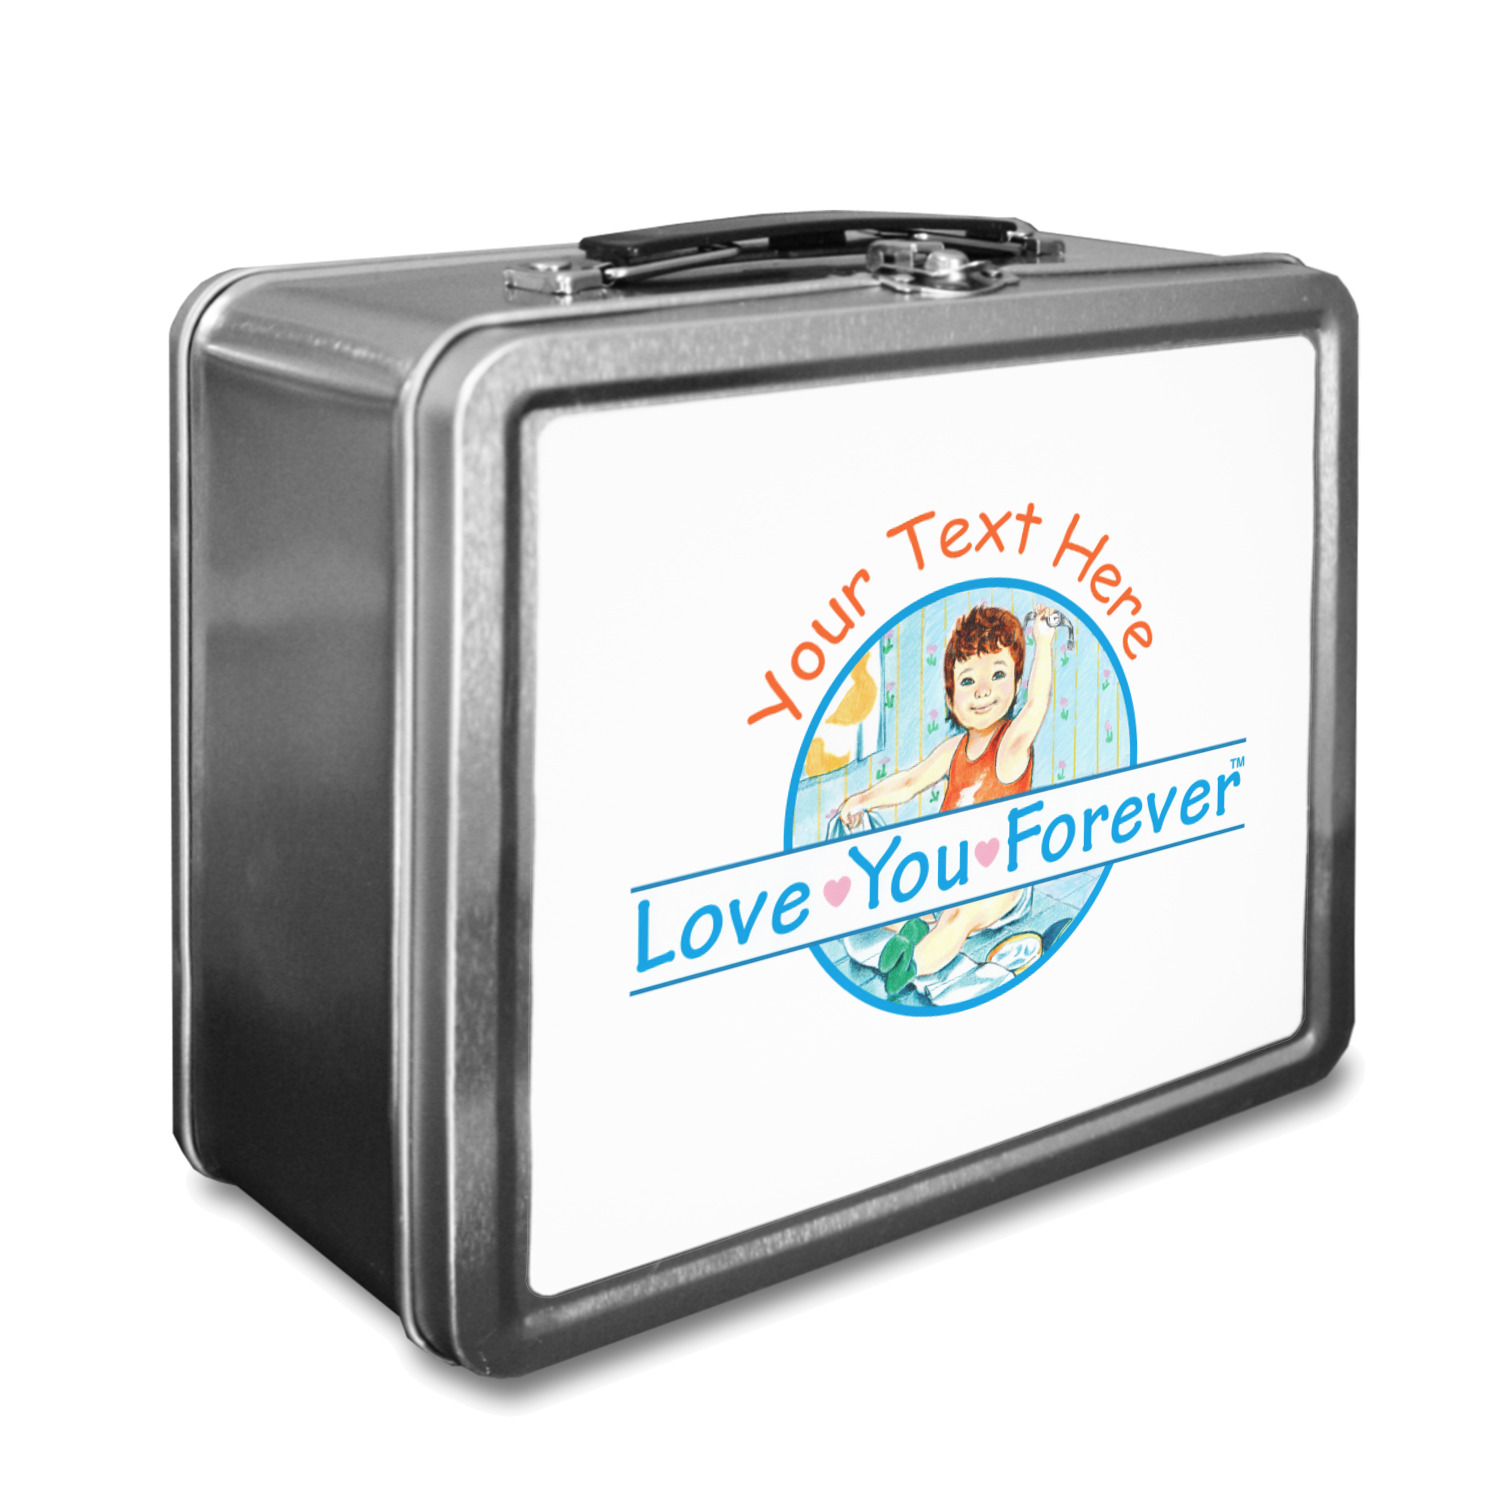 https://www.youcustomizeit.com/common/MAKE/3382926/Love-Your-Forever-Custom-Lunch-Box-Tin.jpg?lm=1694541497